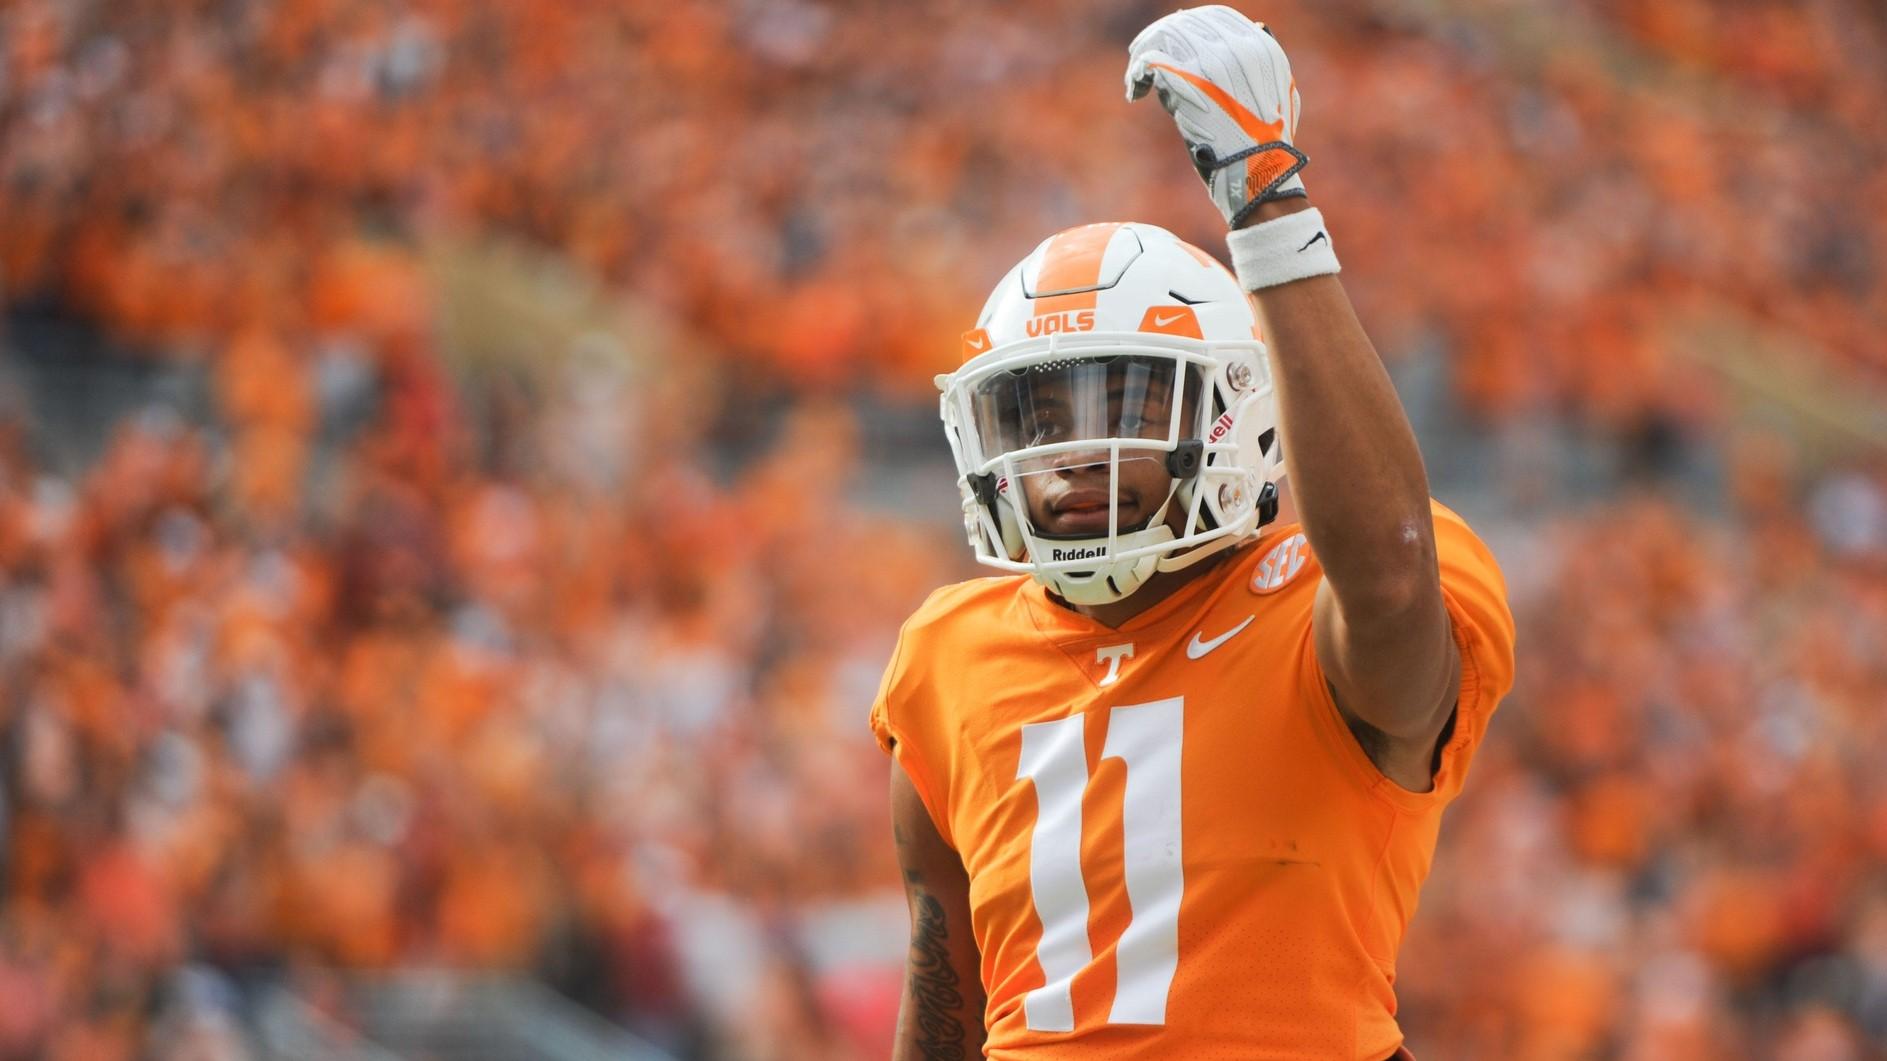 Tennessee wide receiver Jalin Hyatt (11) celebrates during a game between Tennessee and Alabama in Neyland Stadium, on Saturday, Oct. 15, 2022. / Jamar Coach/News Sentinel / USA TODAY NETWORK